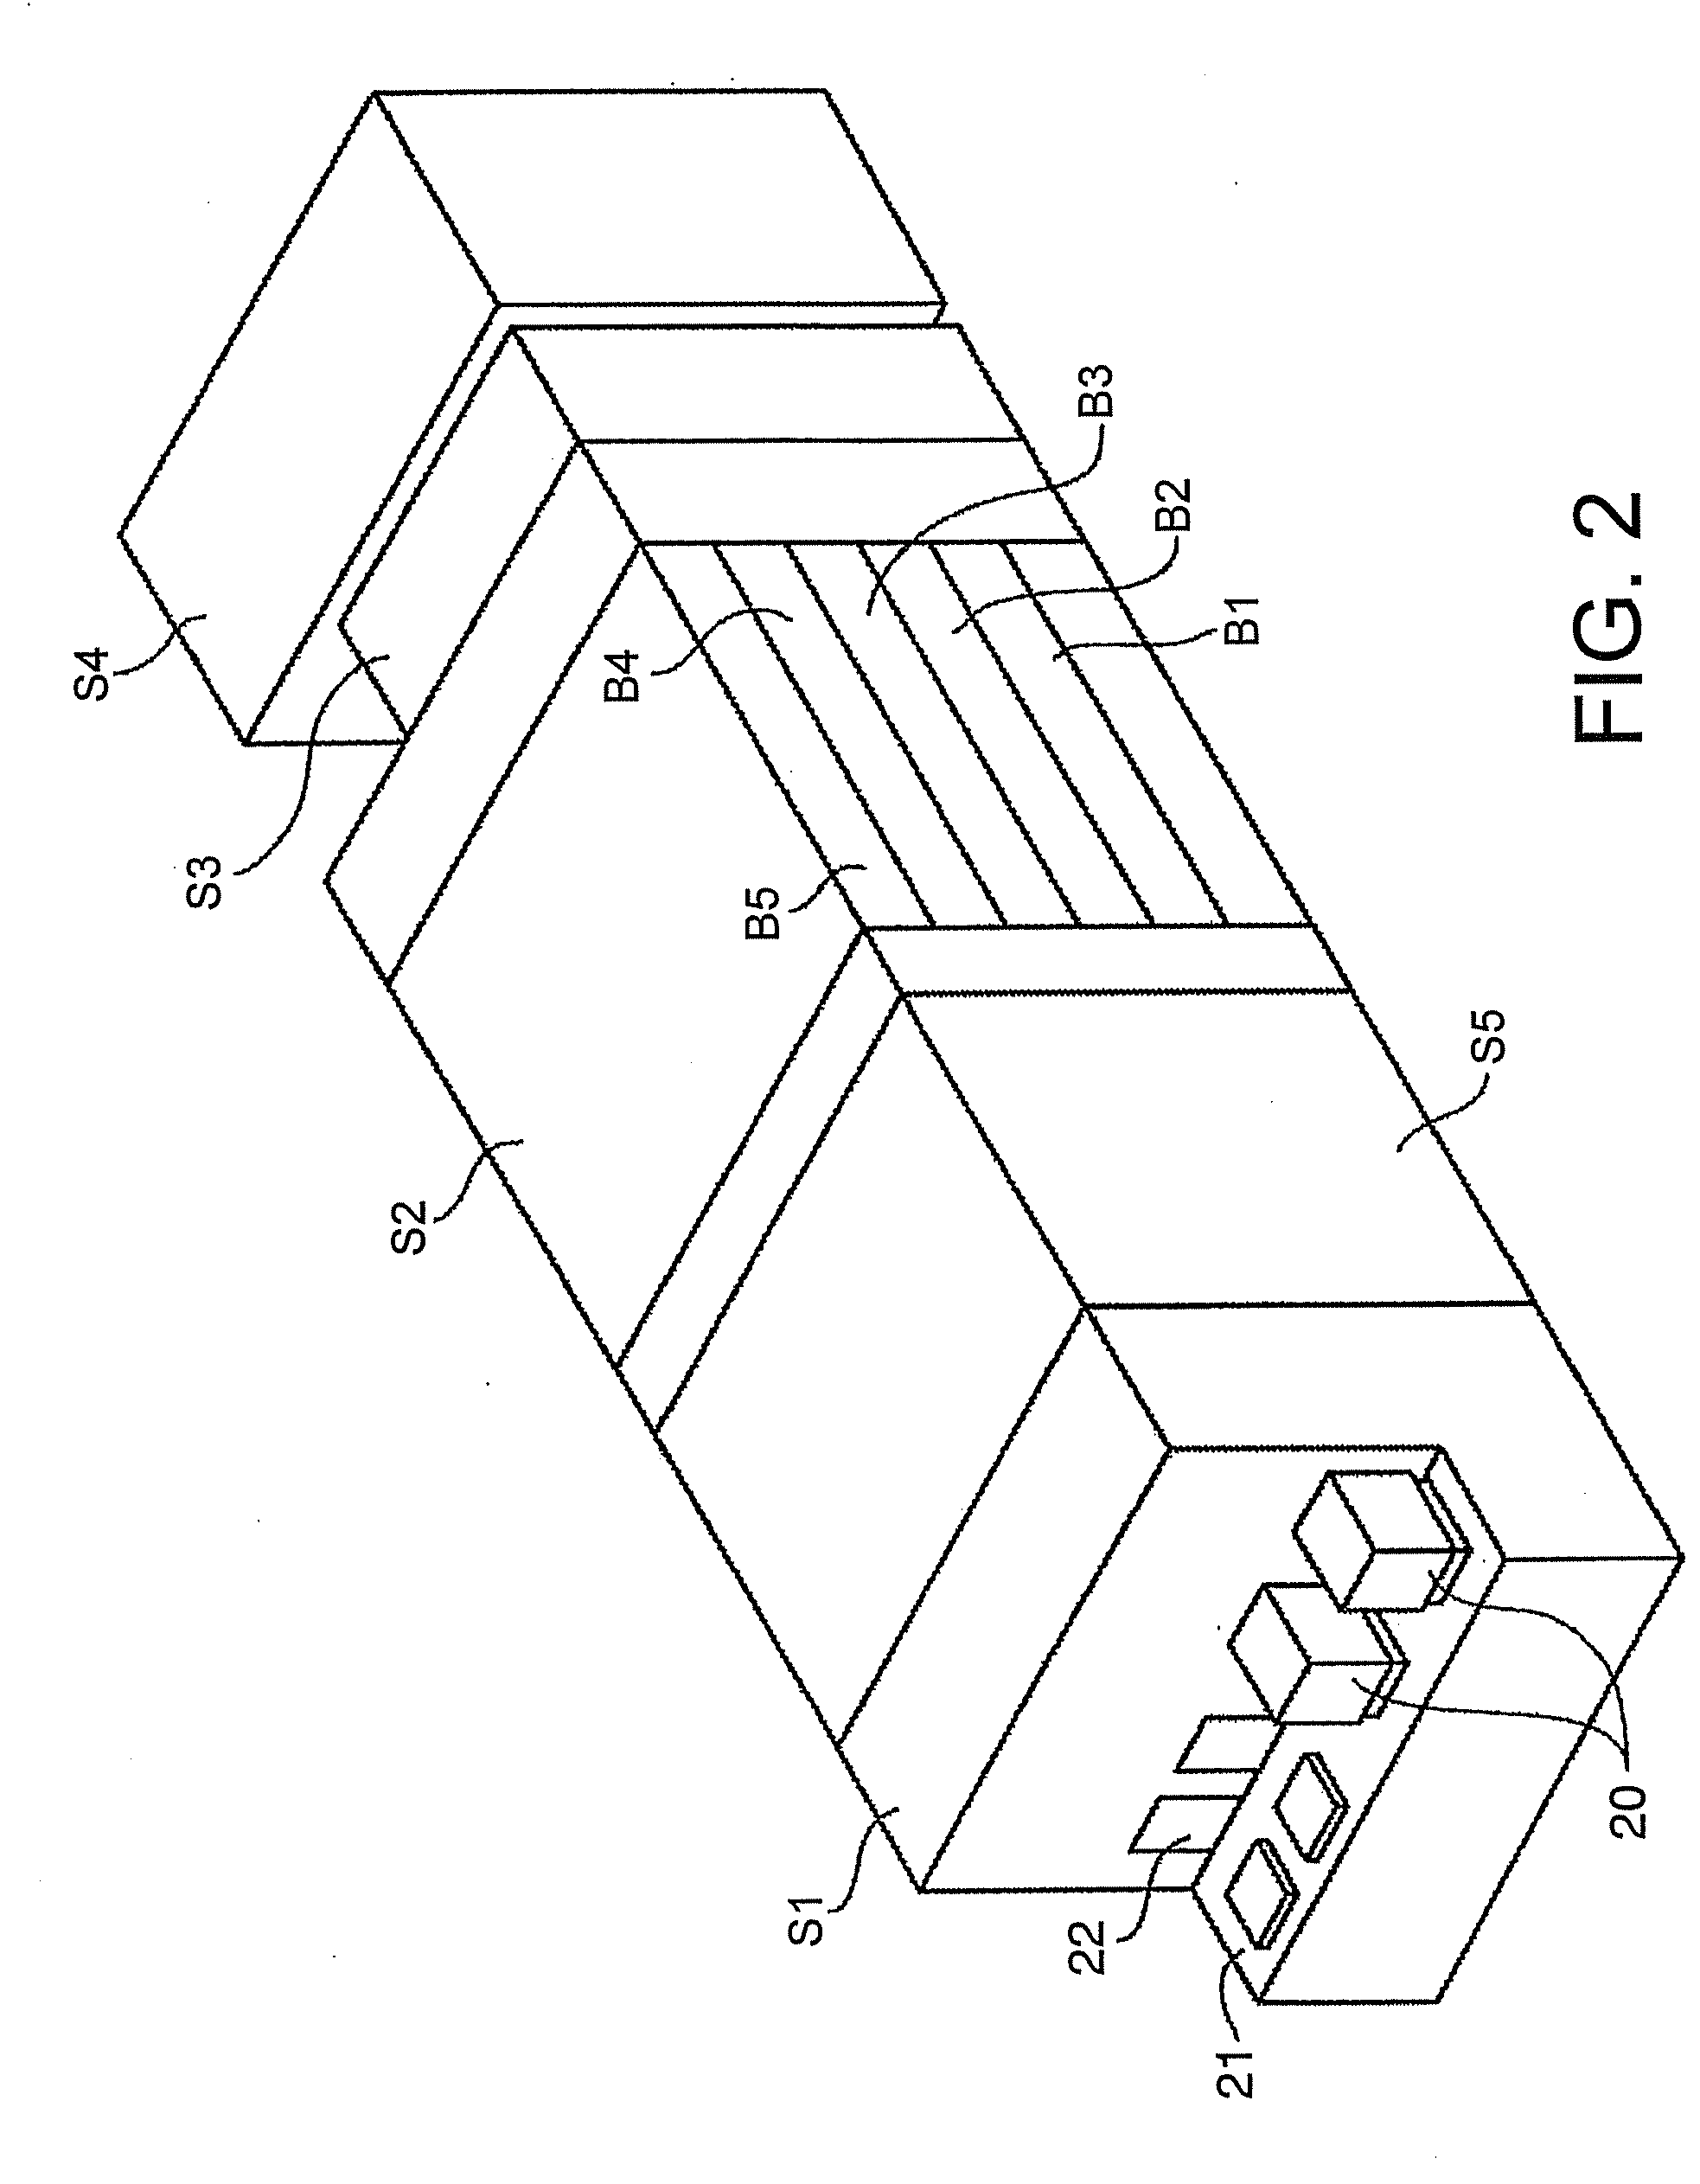 Coating and developing system control method of controlling coating and developing system